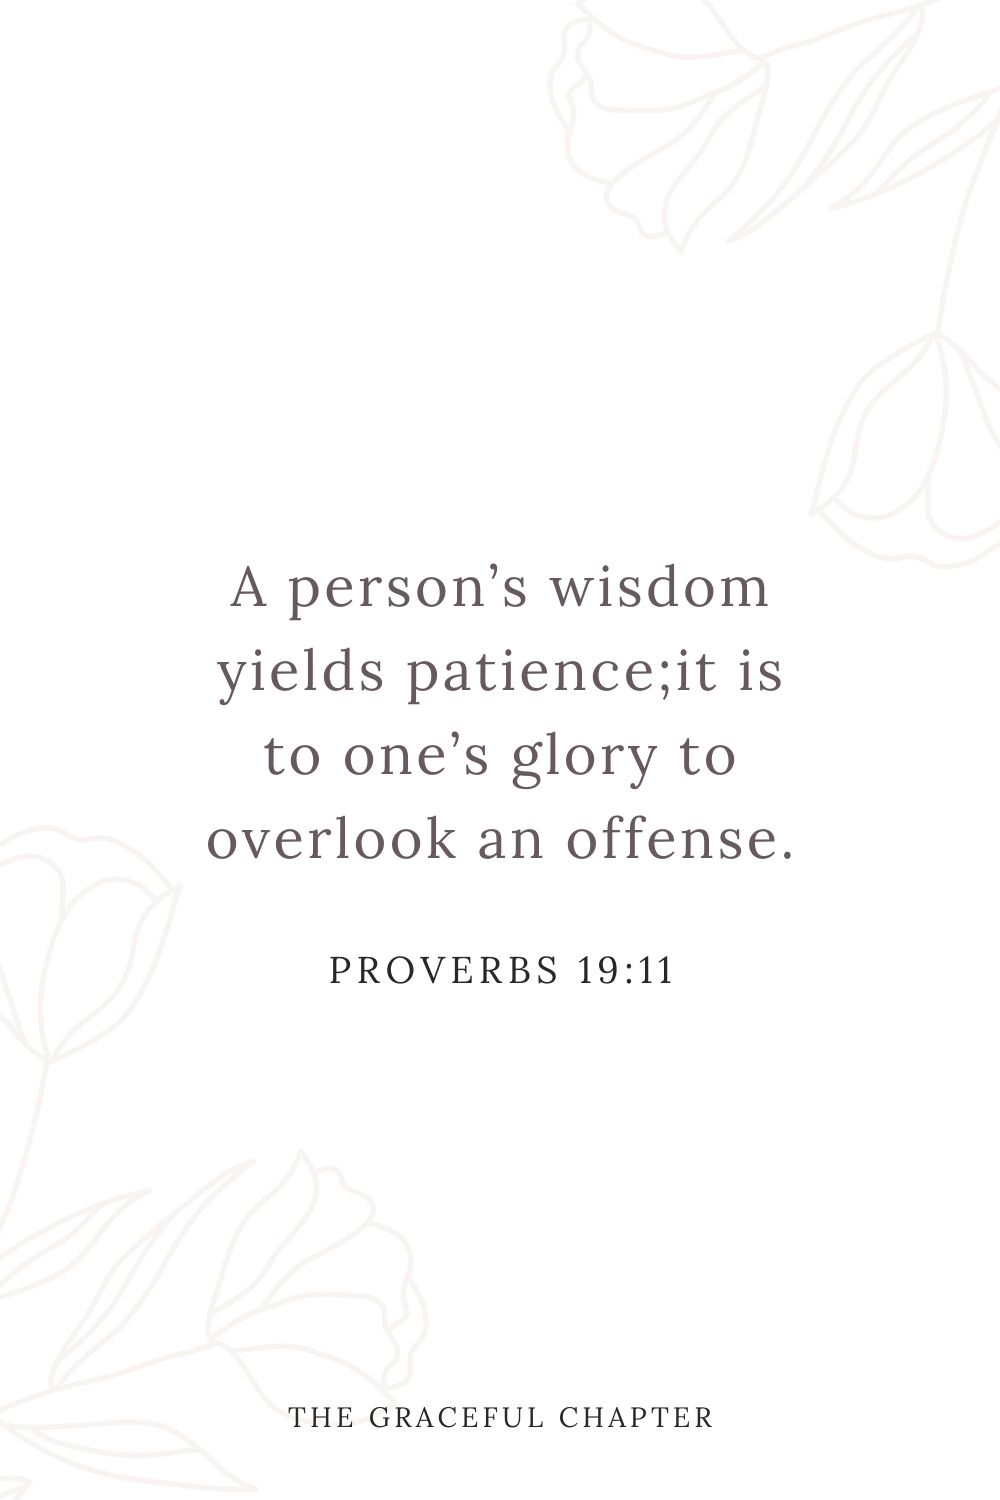 A person’s wisdom yields patience; it is to one’s glory to overlook an offense. Proverbs 19:11